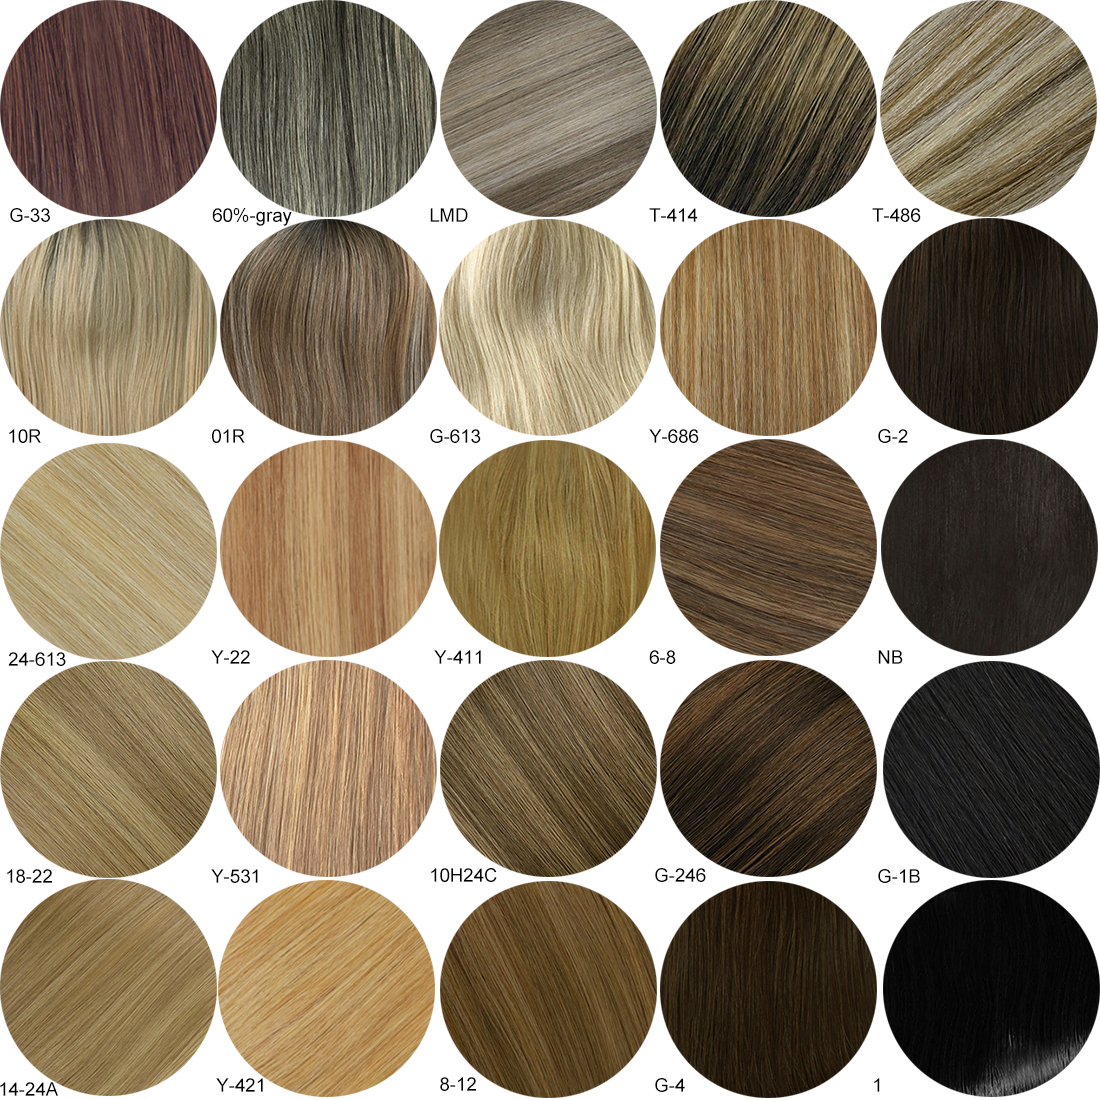 Colors of UniWigs human hair you can choose from